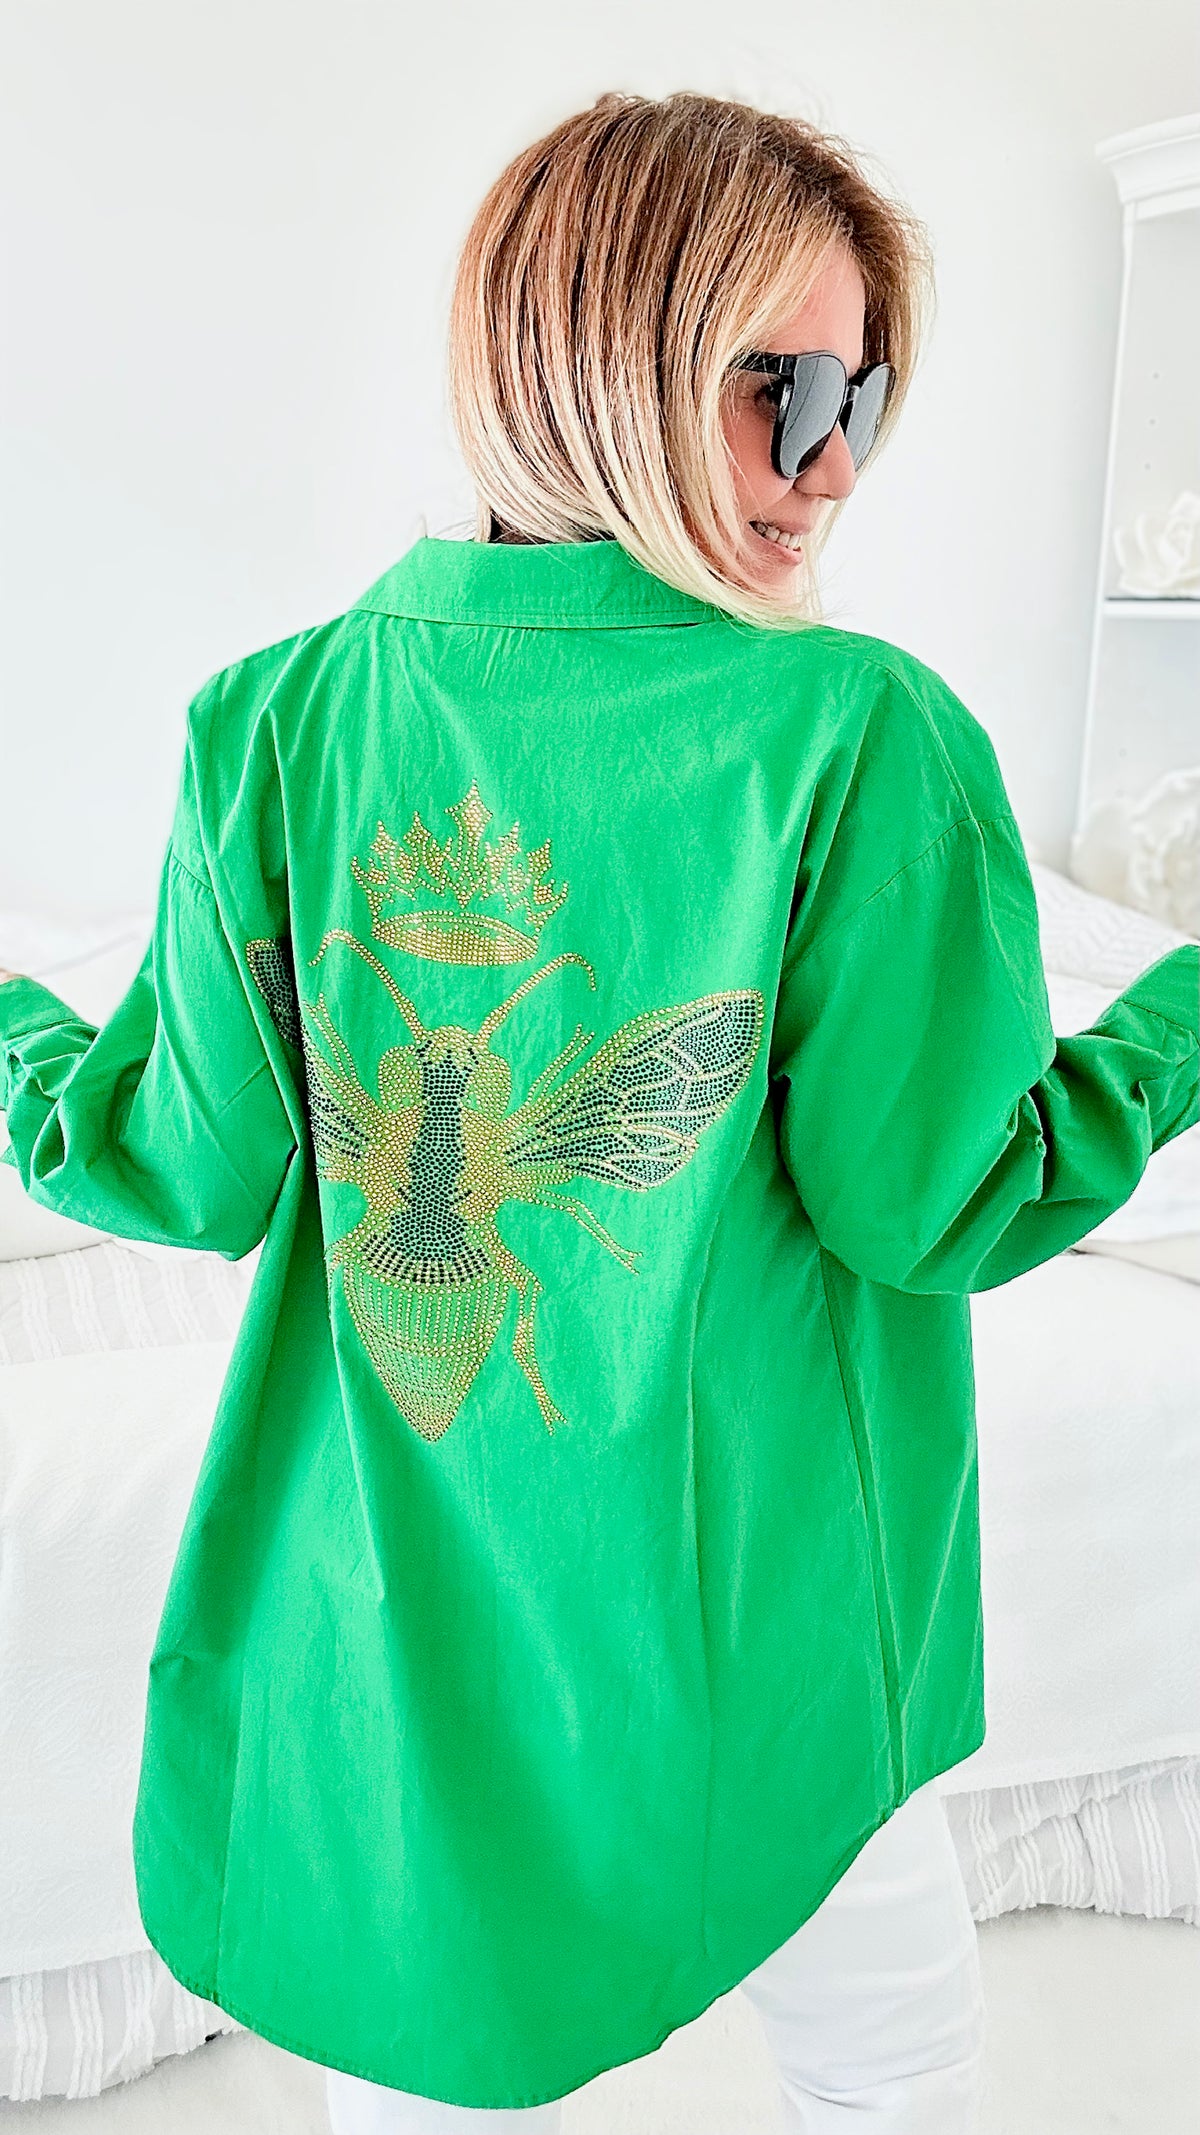 Bee Crown Queen Button Up Shirt - Green-170 Bottoms-Moving Forward Designs-Coastal Bloom Boutique, find the trendiest versions of the popular styles and looks Located in Indialantic, FL